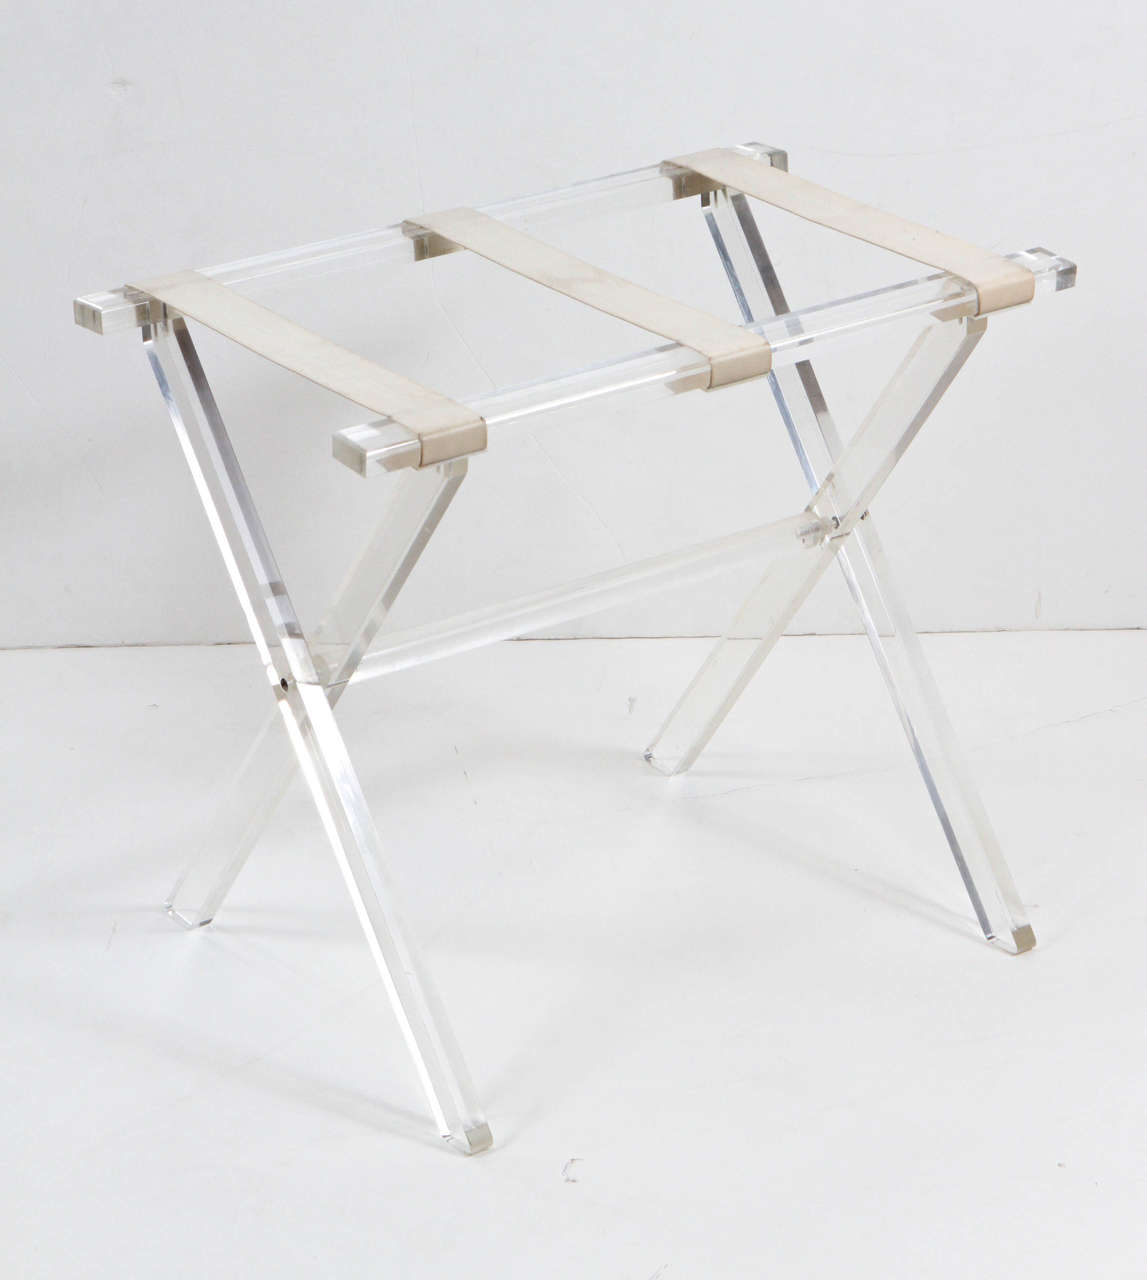 Scheibe folding lucite luggage rack with white leather strapping